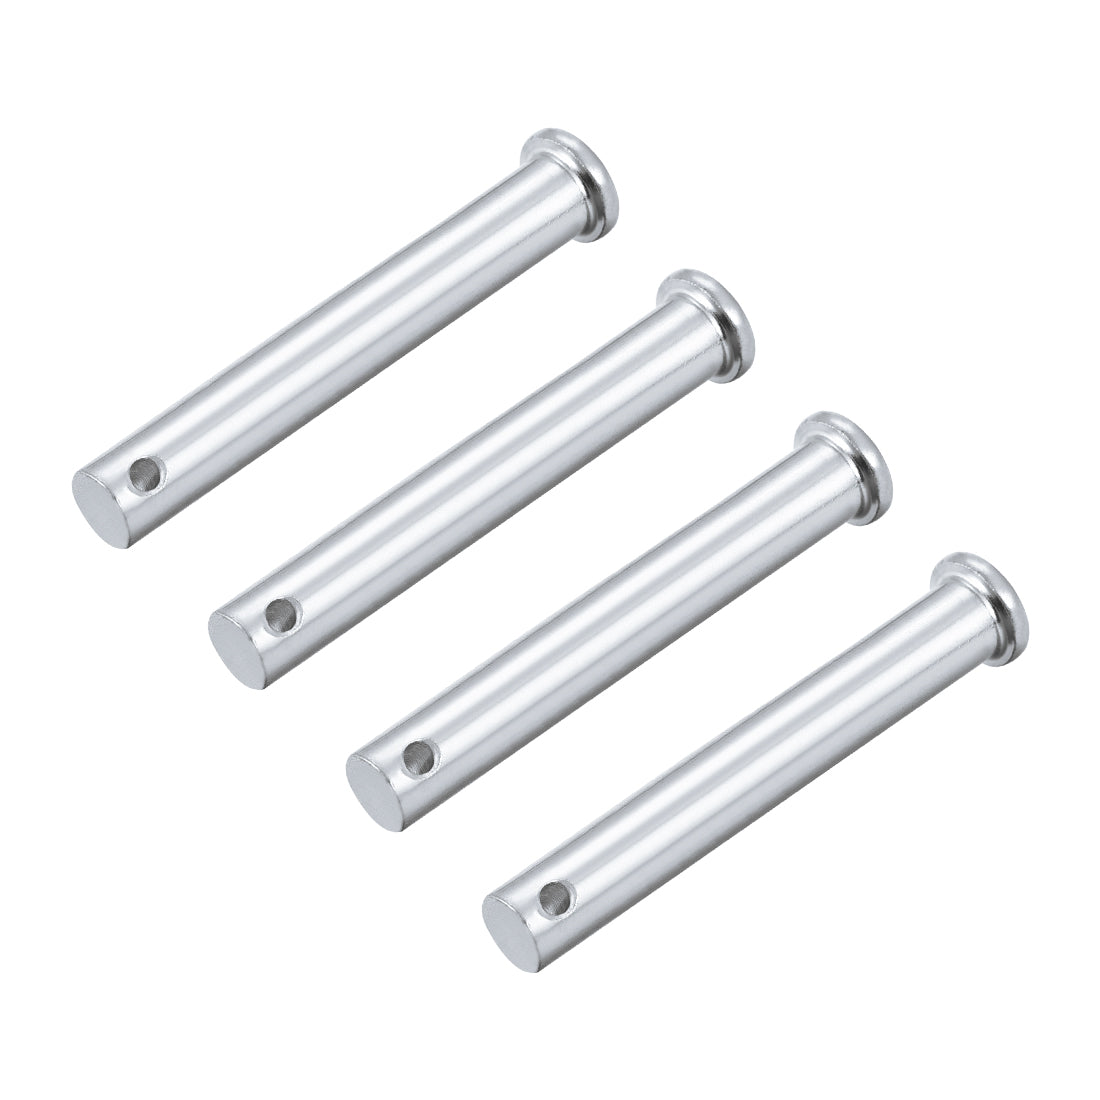 Uxcell Uxcell Single Hole Clevis Pins - 10mm X 75mm Flat Head Zinc-Plating Solid Steel Link Hinge Pin 4Pcs